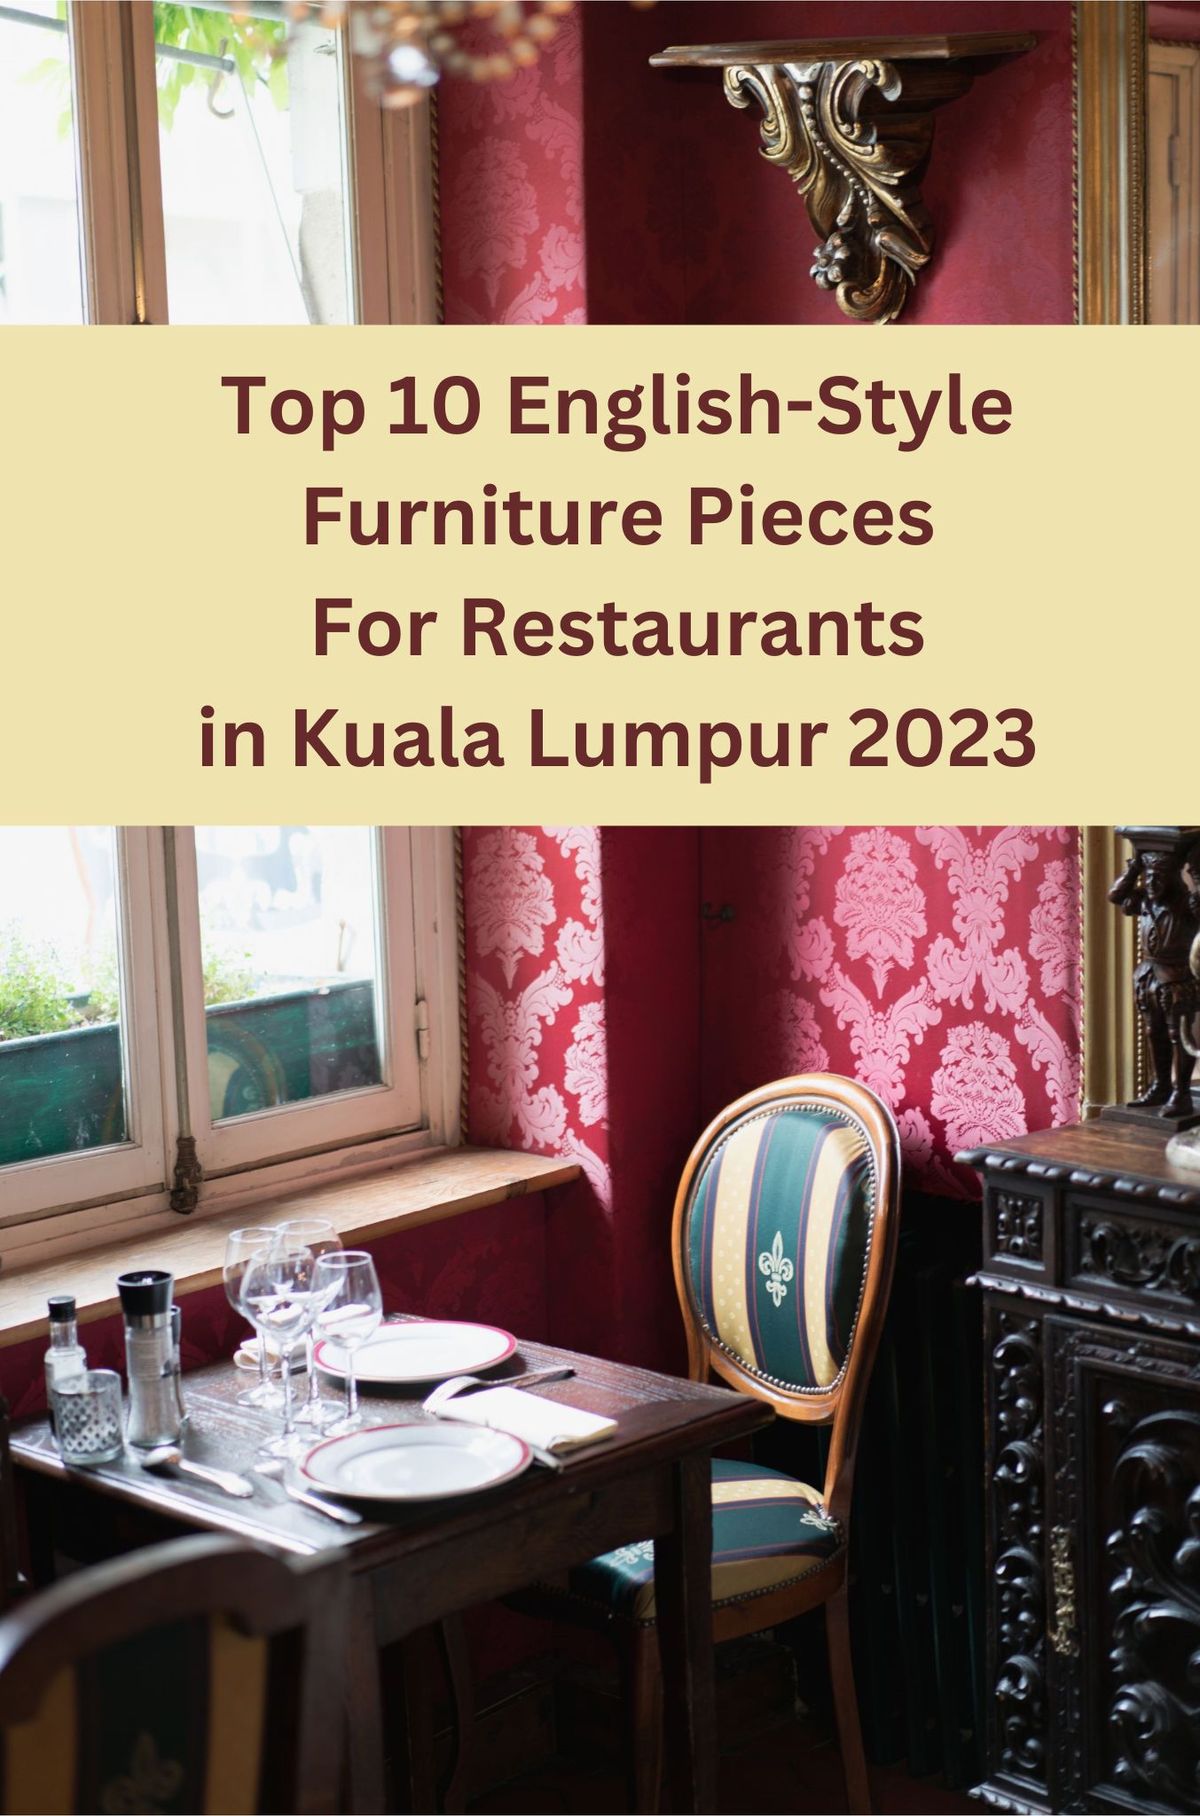 Top 10 English-Style Furniture Pieces for Restaurants in Kuala Lumpur 2023